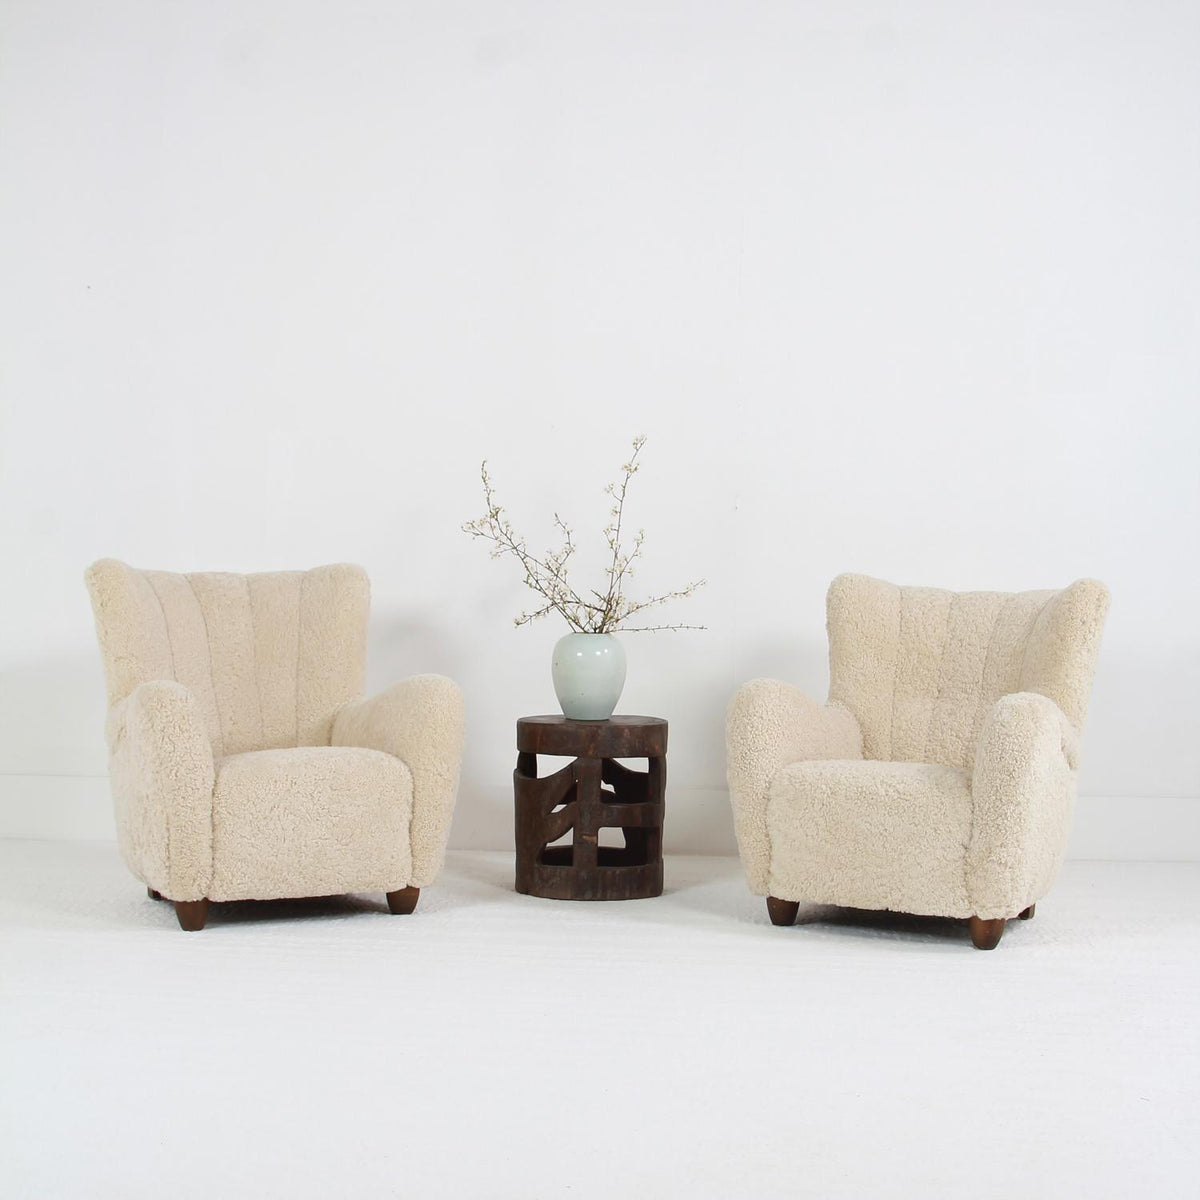 Huge Pair of Danish Mid-Century Lounge Chairs Upholstered in Natural Sheepskin